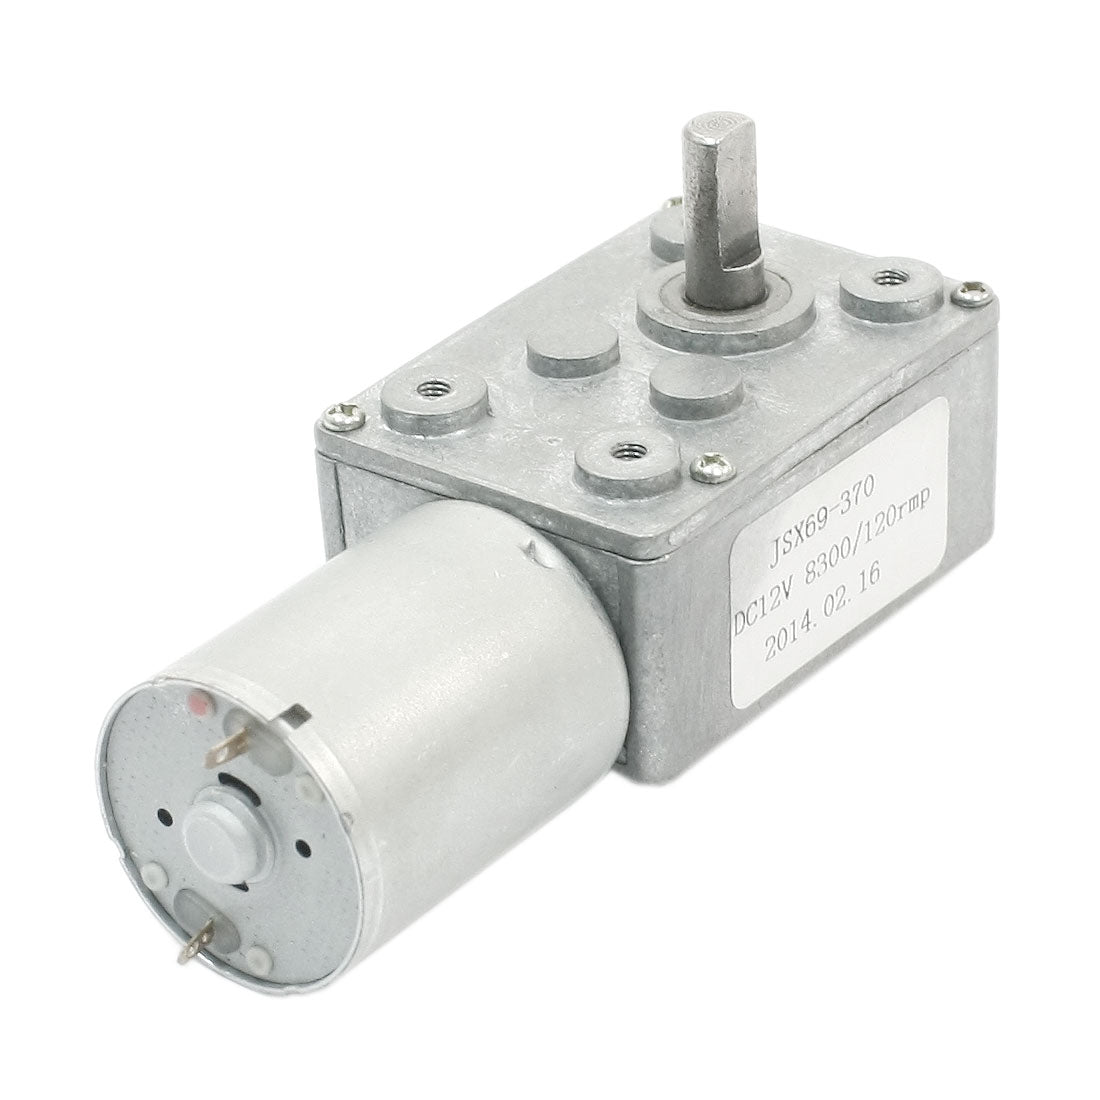 uxcell Uxcell JSX69-370 4.5mm Dia D Shaft 2Pin Connect Speed Rotary Reducer Reduction Ratio 8300RPM/120RPM DC12V 8300RPM 120RPM Worm Geared Box Motor